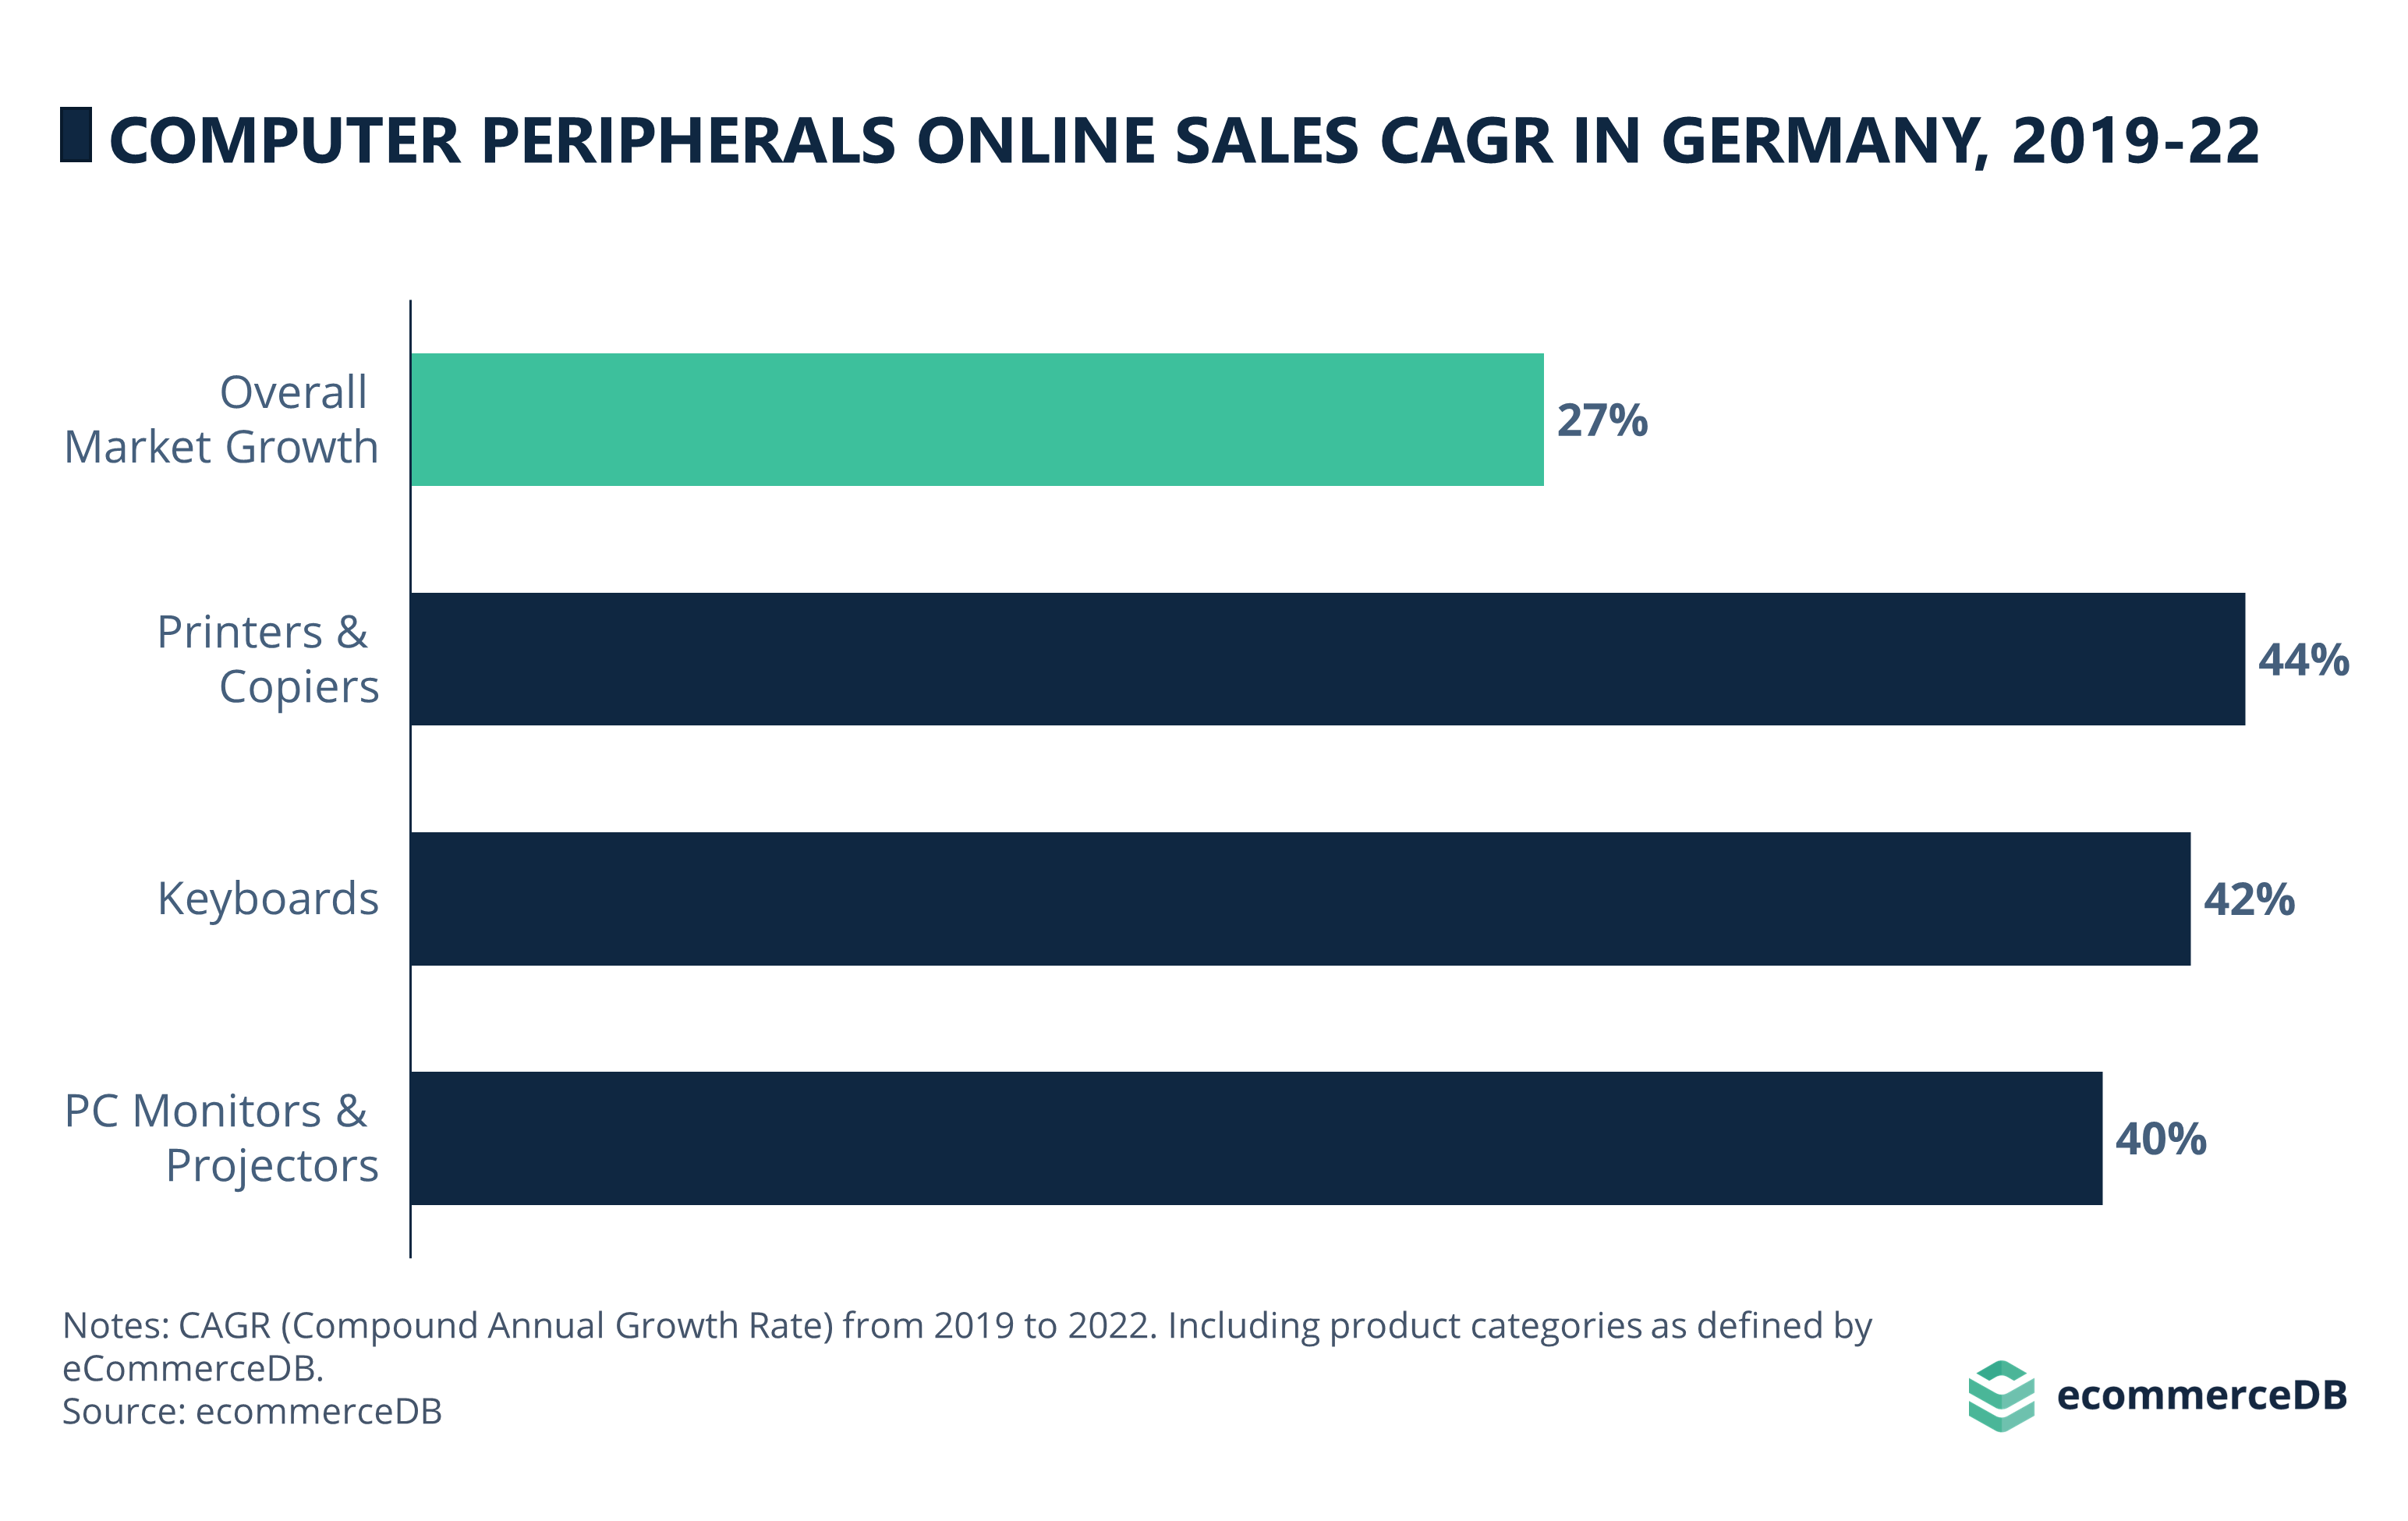 Computer Peripherals Online Sales CAGR in Germany, 19-22